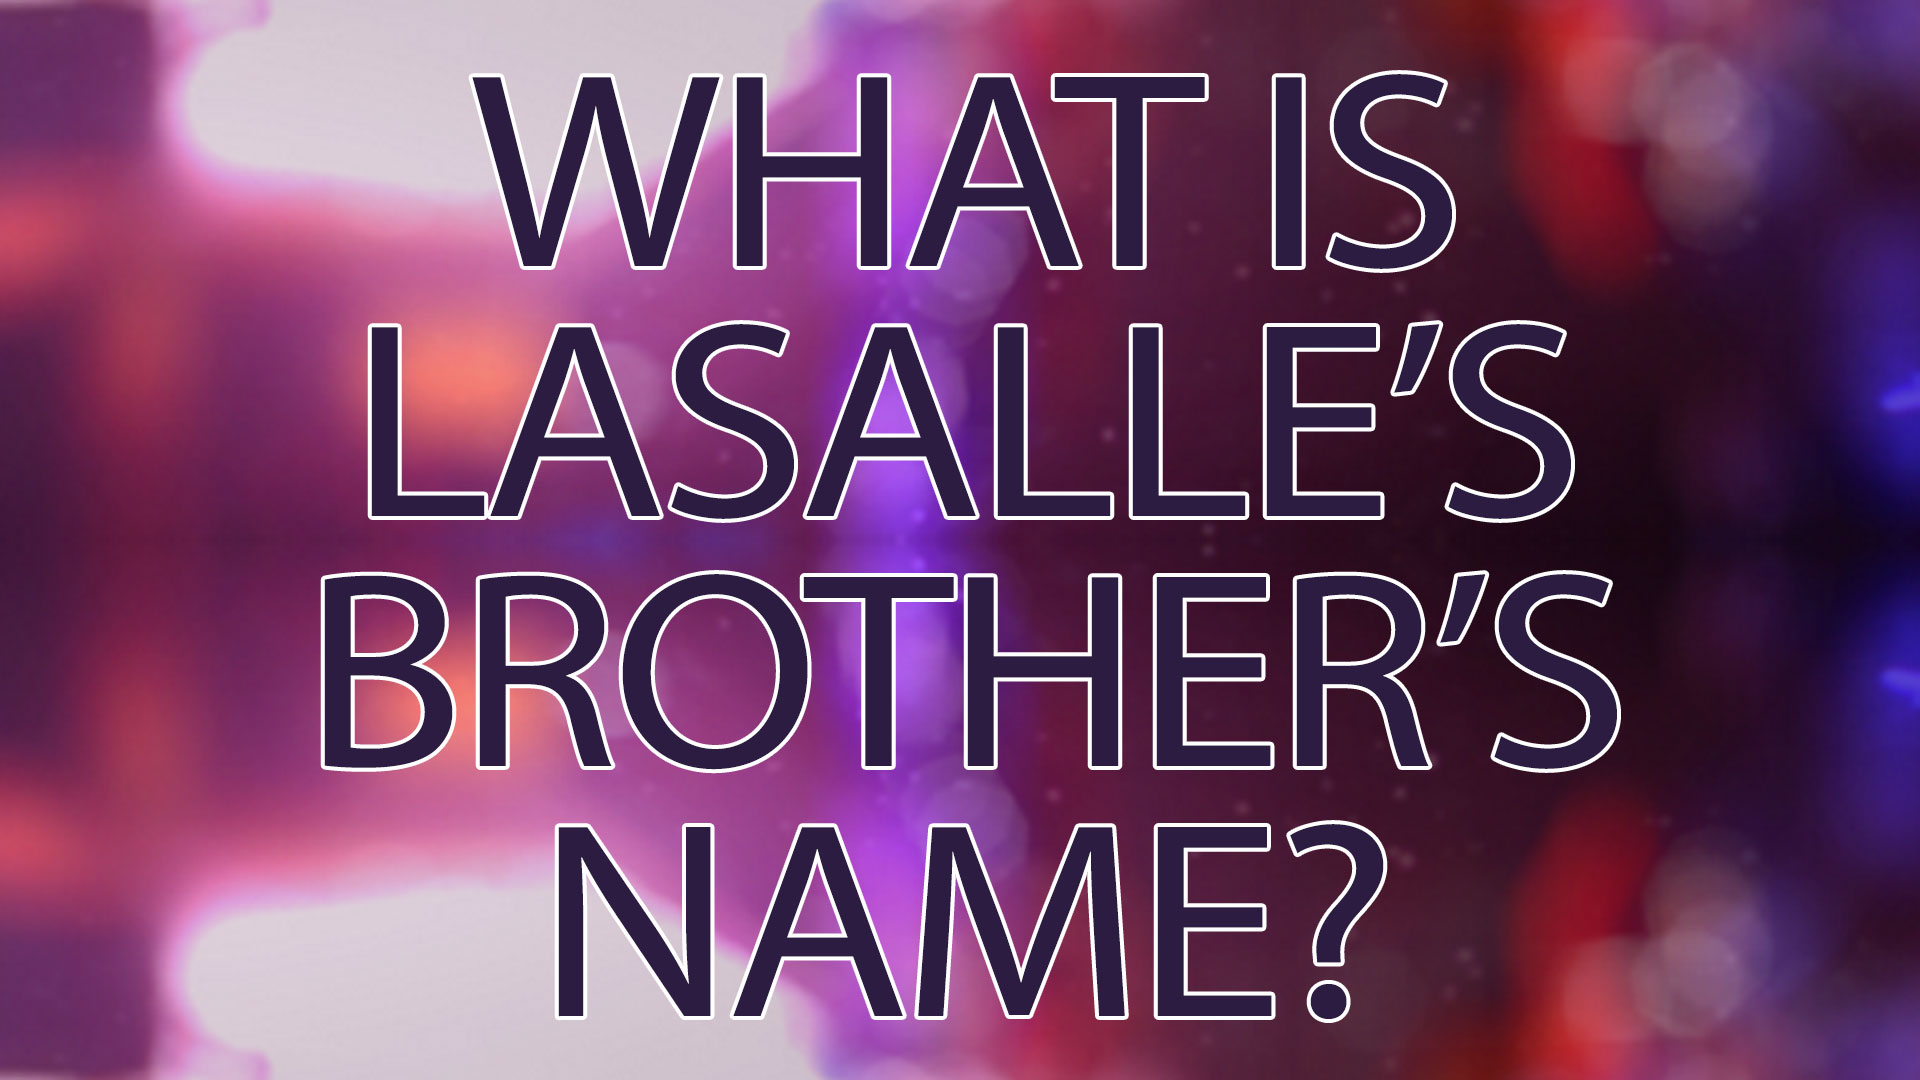 What is Lasalle's brother's name?